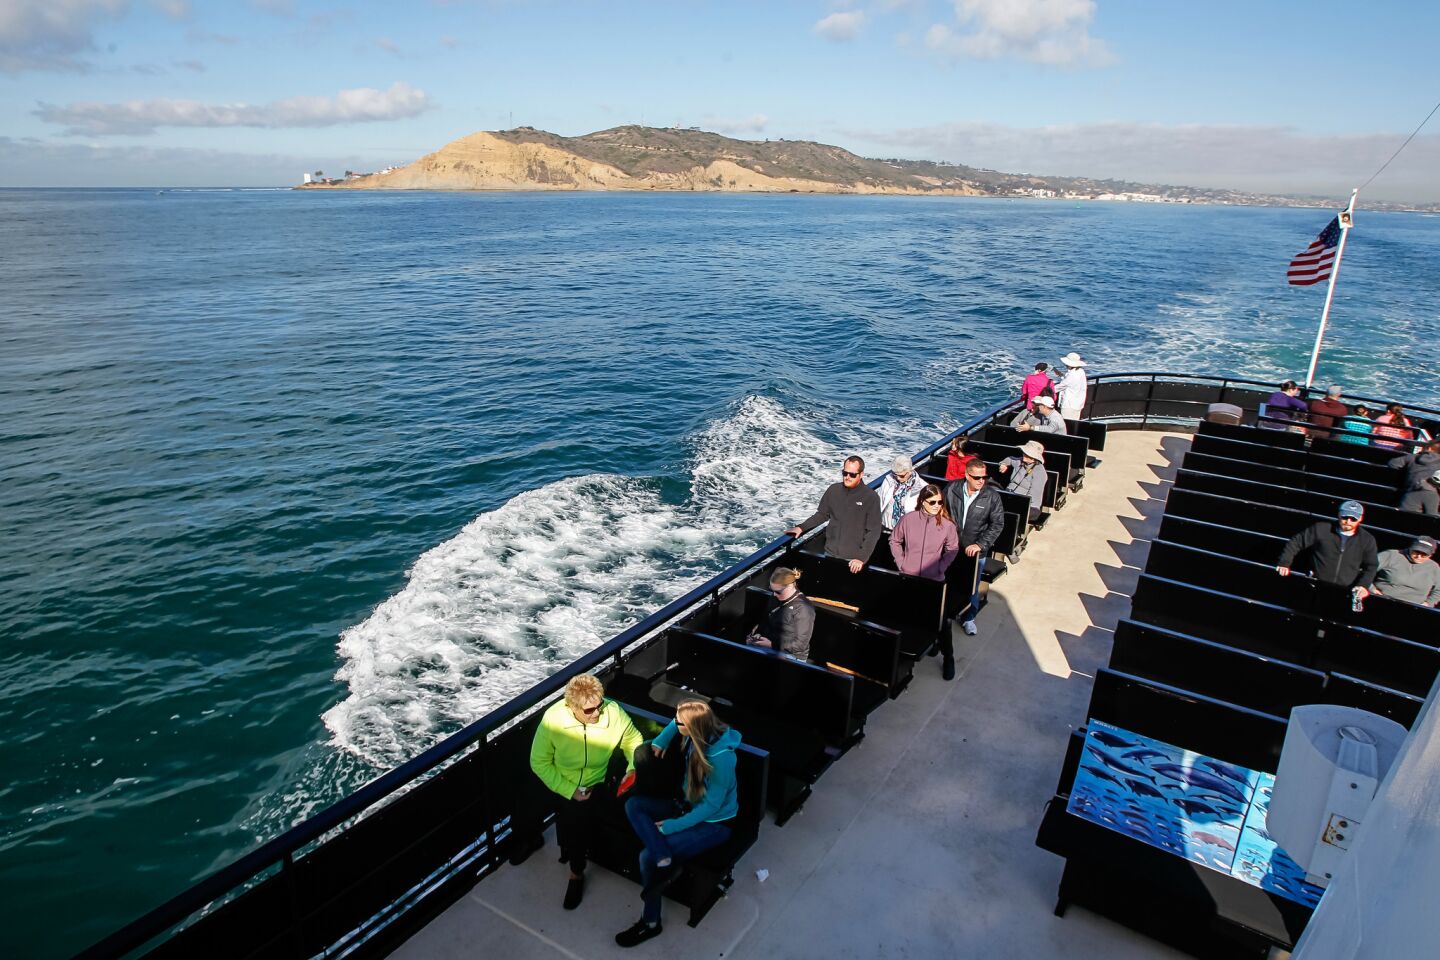 Passengers aboard the Marietta enjoy views off Point Loma as they leave on a whale watching tour.